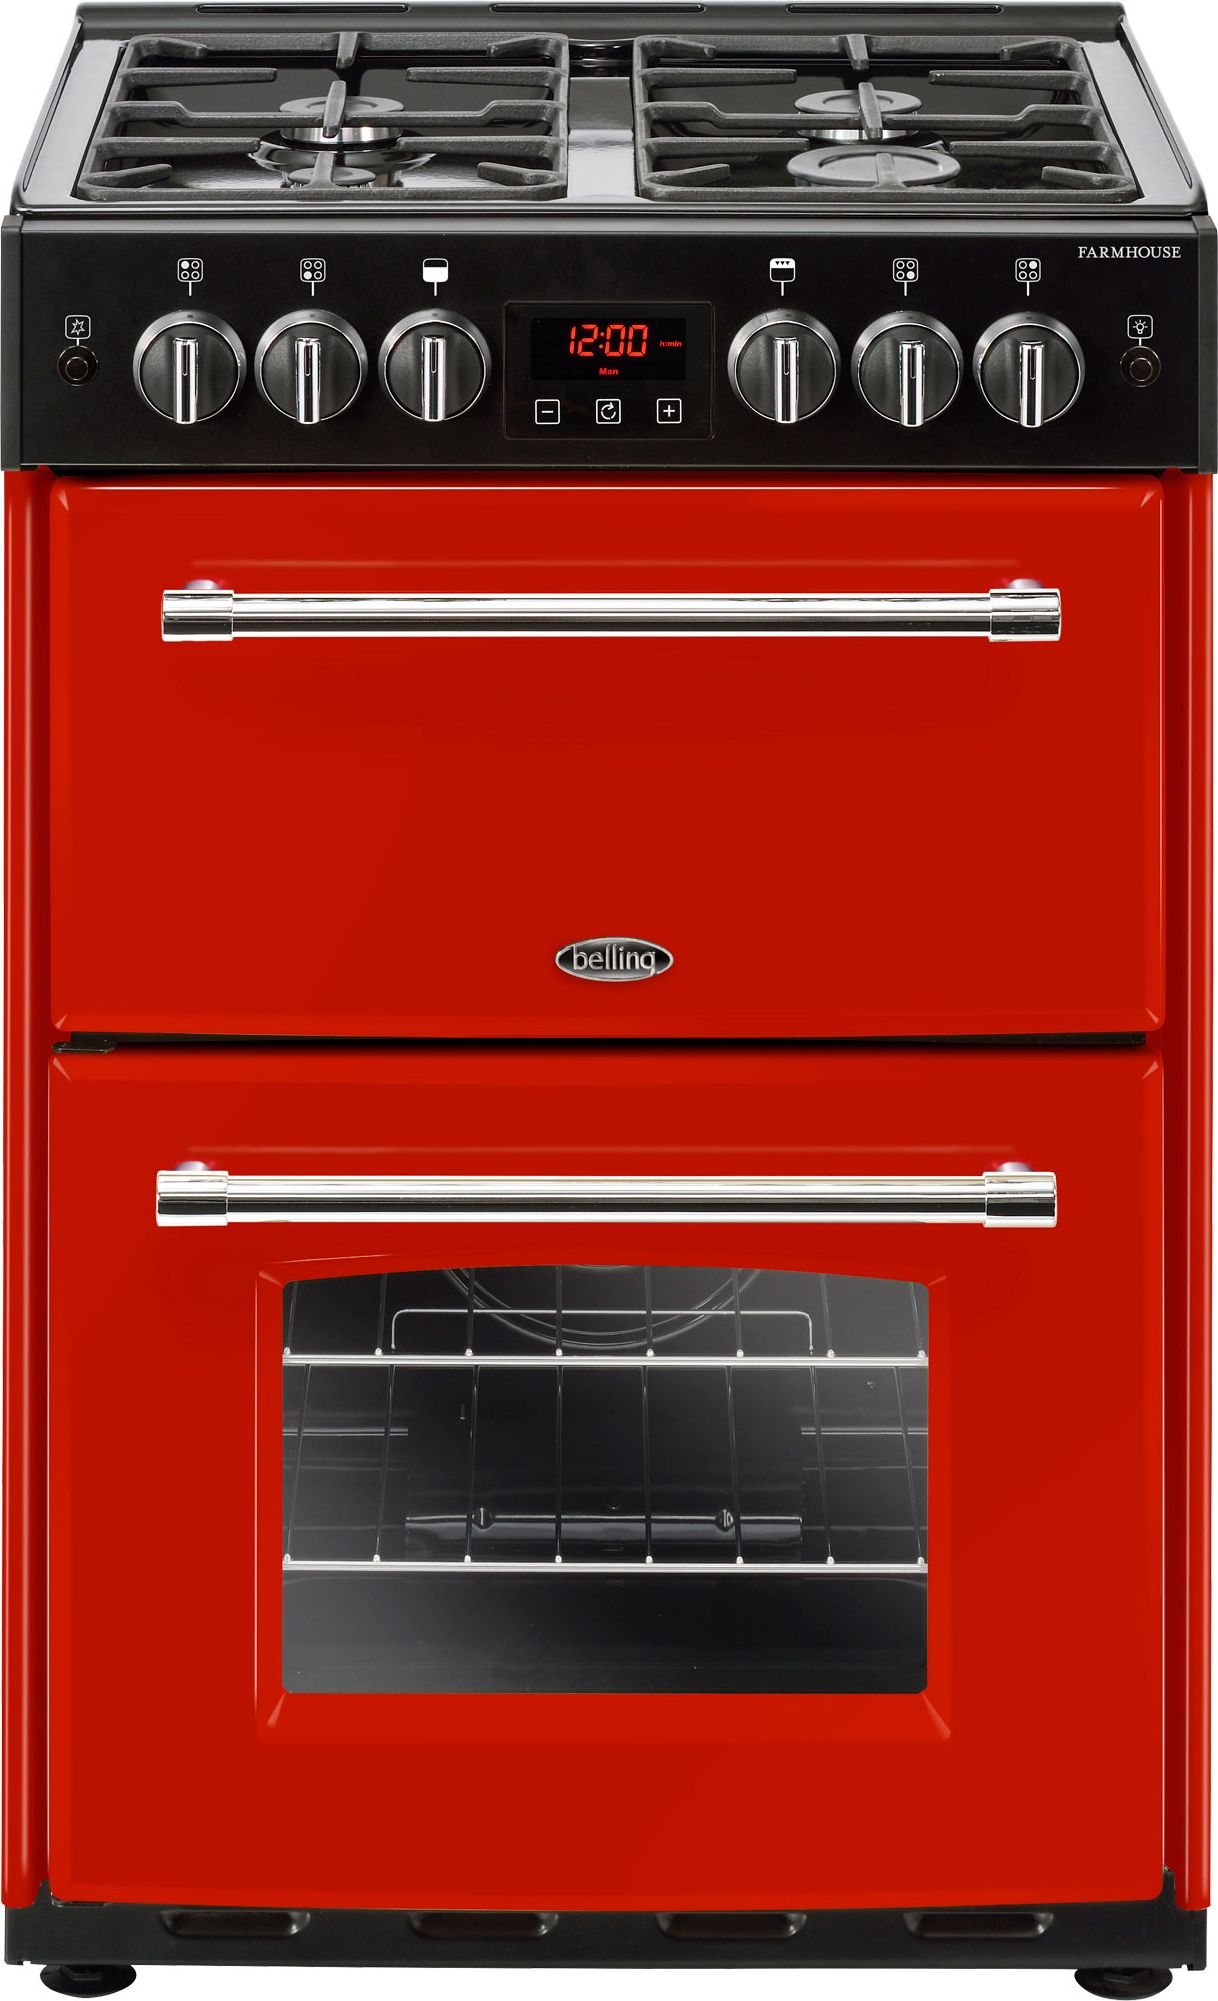 Belling Farmhouse60G 60cm Freestanding Gas Cooker with Full Width Electric Grill - Hot Jalapeno - A+/A Rated, Red